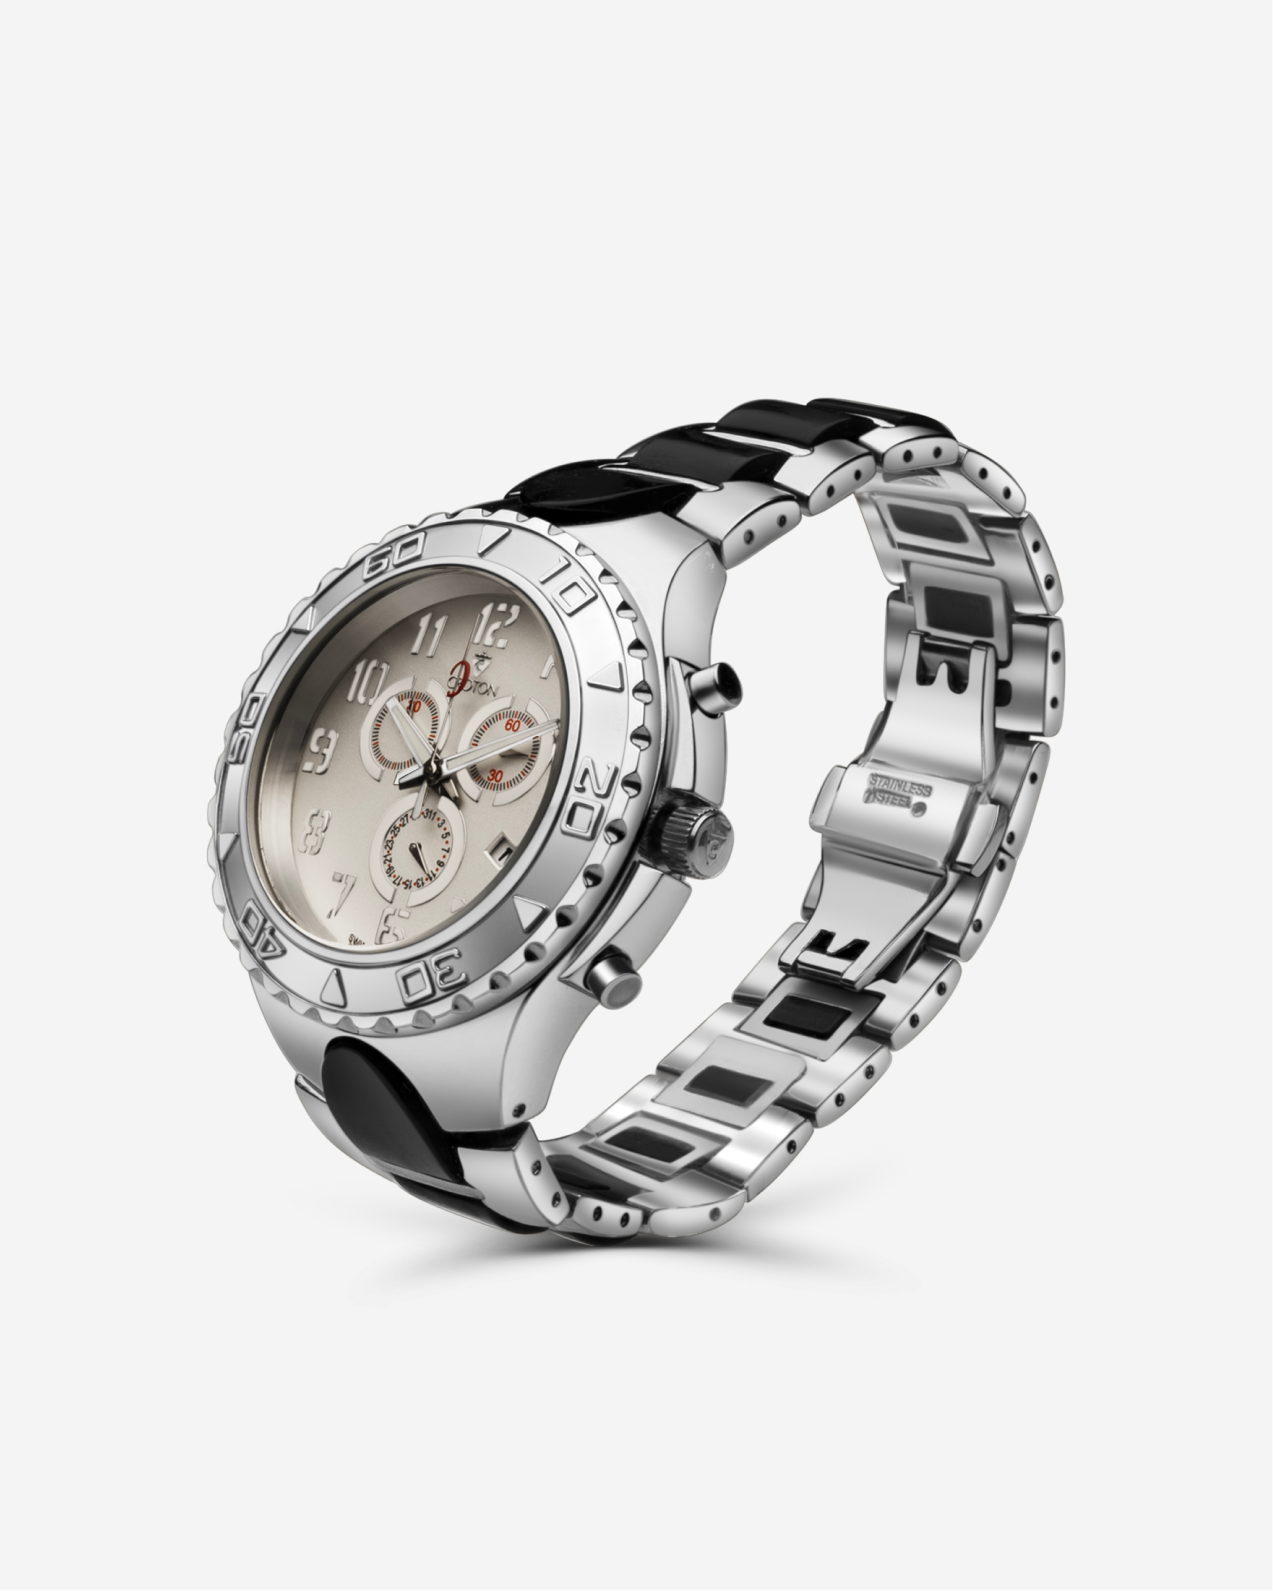 Croton Men's "Super C" Swiss Chronograph with Stainless & Silicon Bracelet